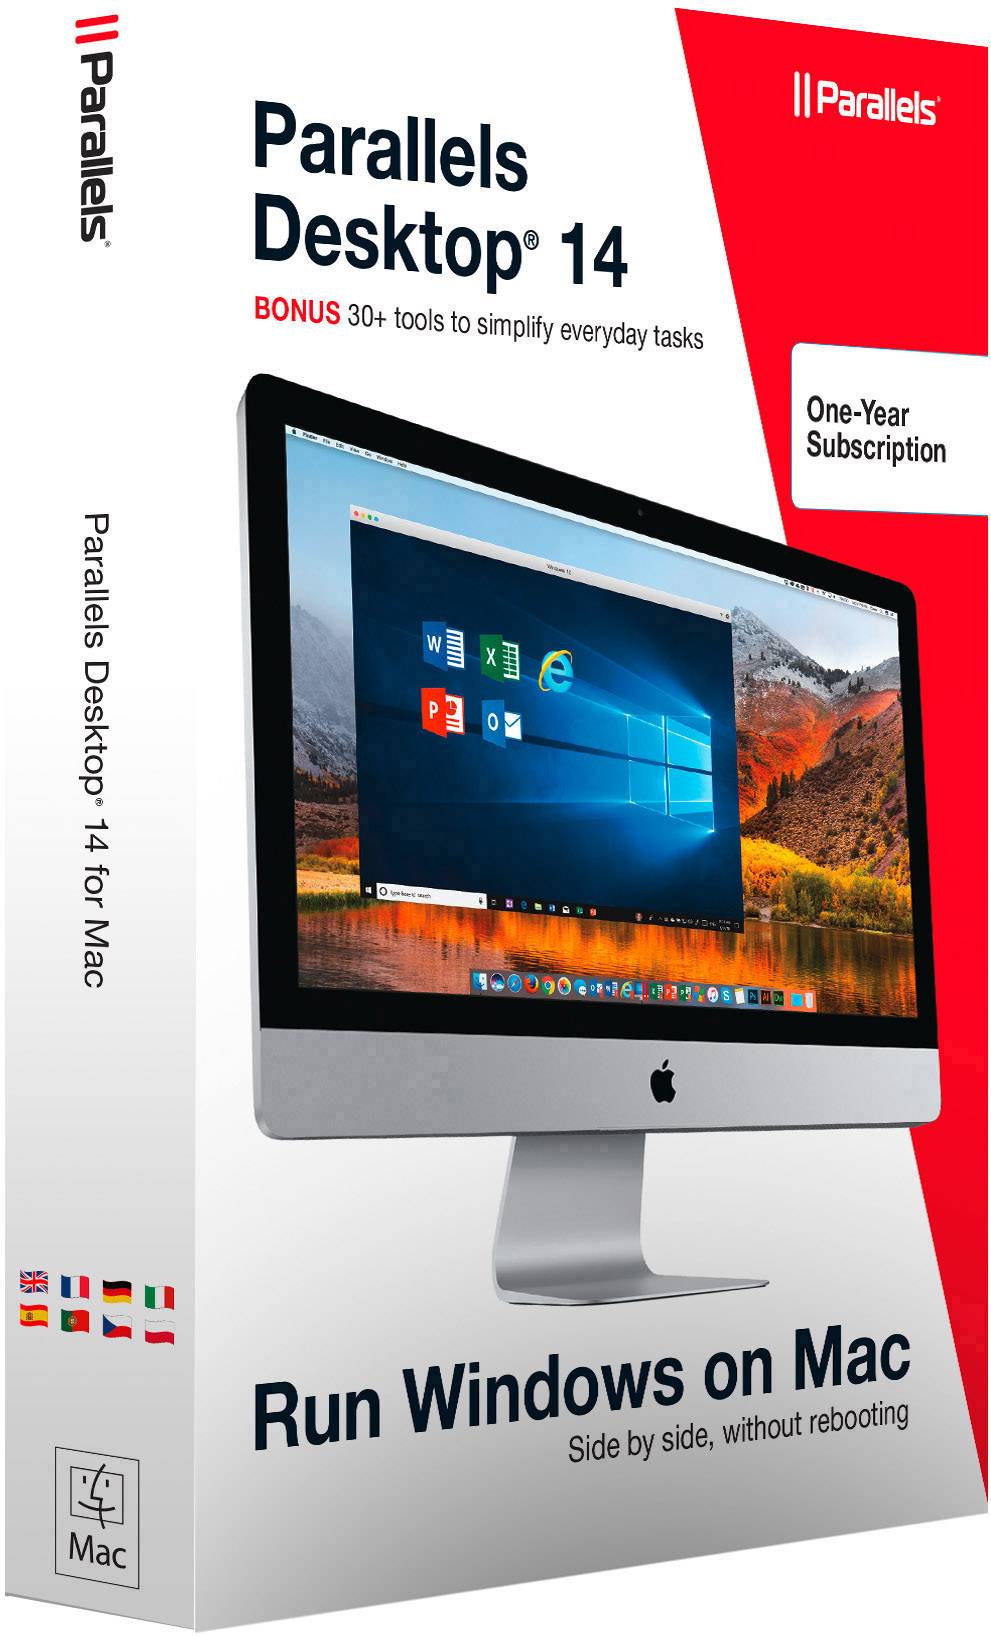 buy windows for parallels mac